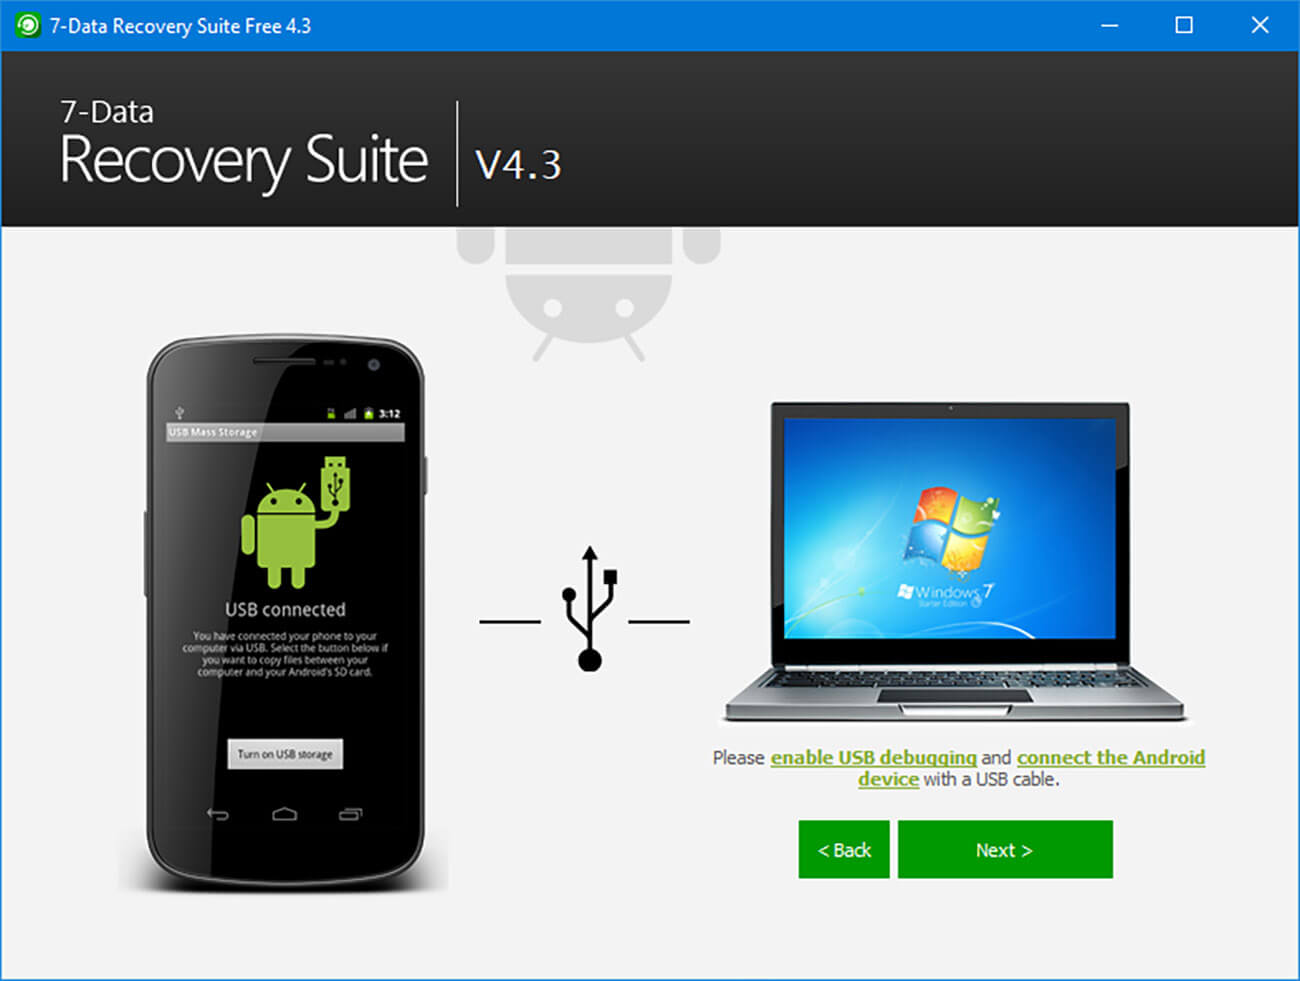 cellphone data recovery pro